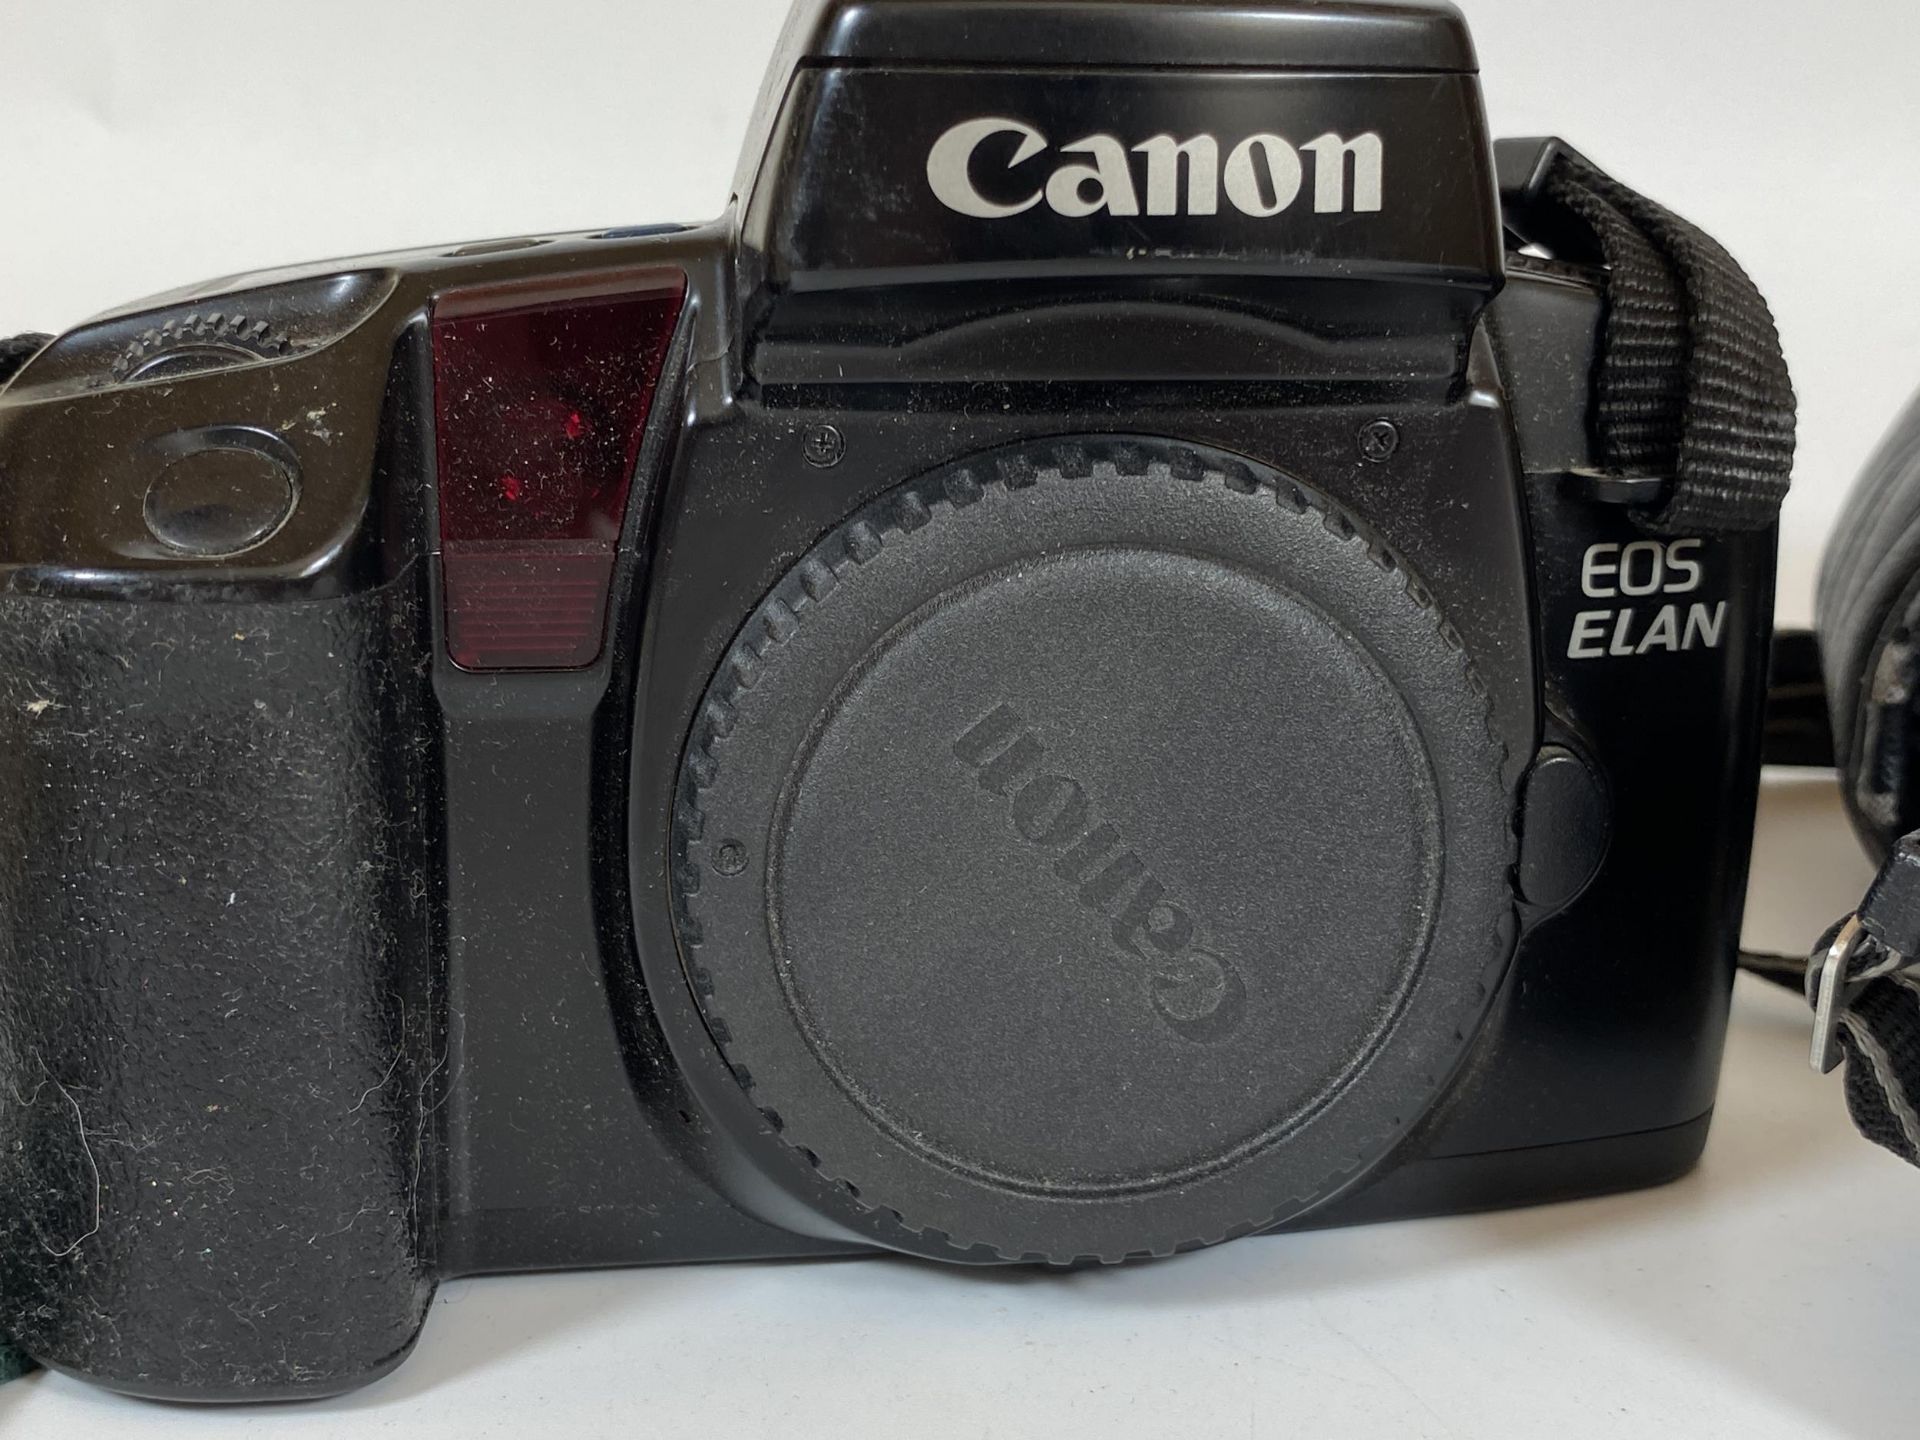 TWO CANON CAMERAS - CANON EOS ELAN BODY AND CANON Z135 WITH 38-135MM LENS - Image 2 of 3